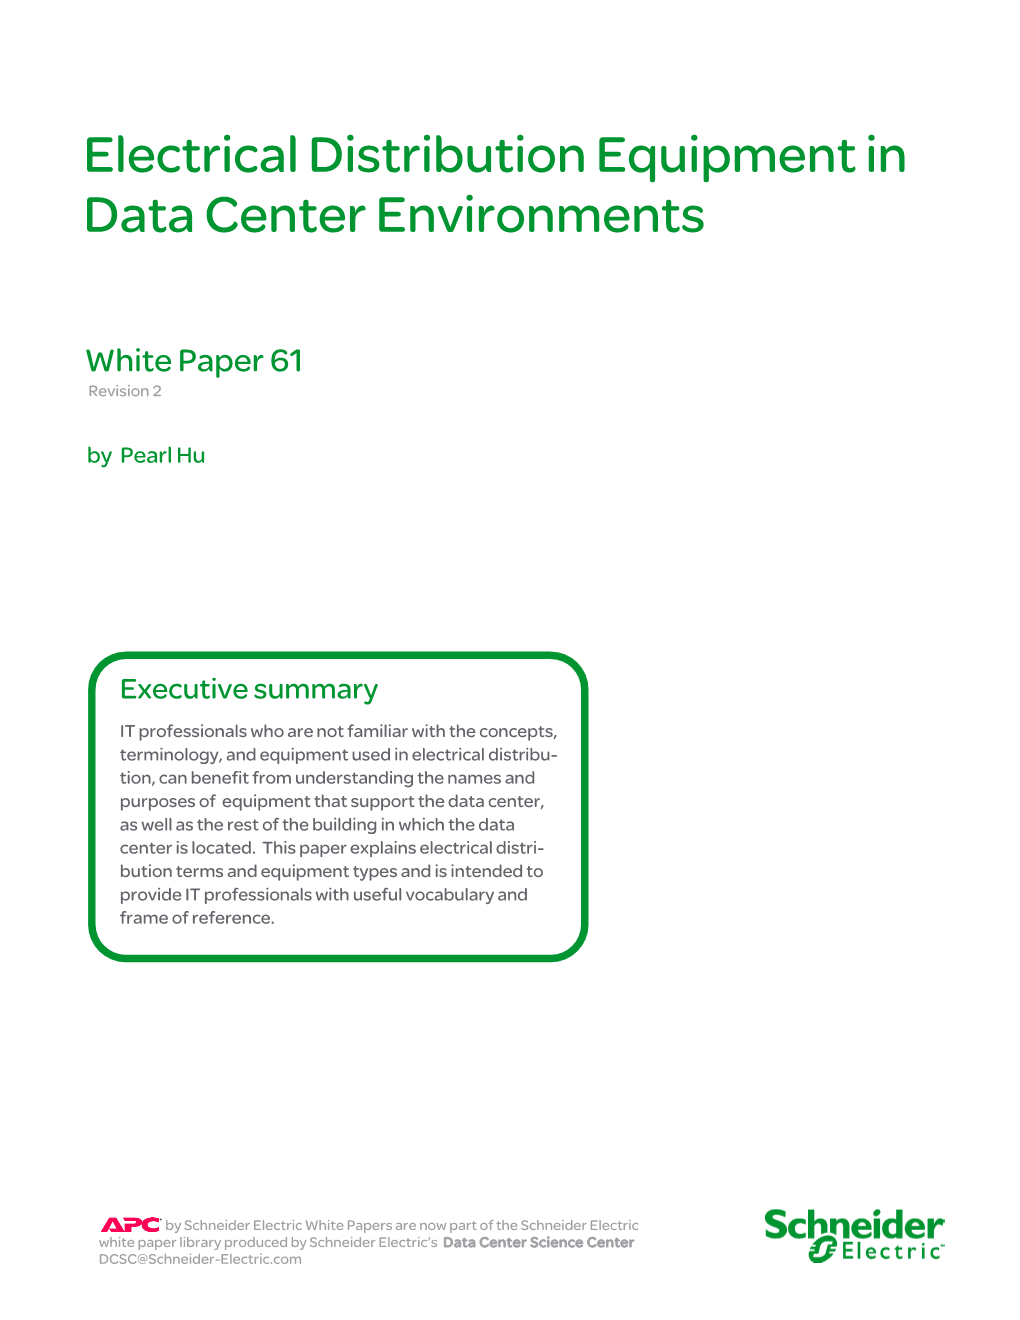 Electrical Distribution Equipment in Data Center Environments